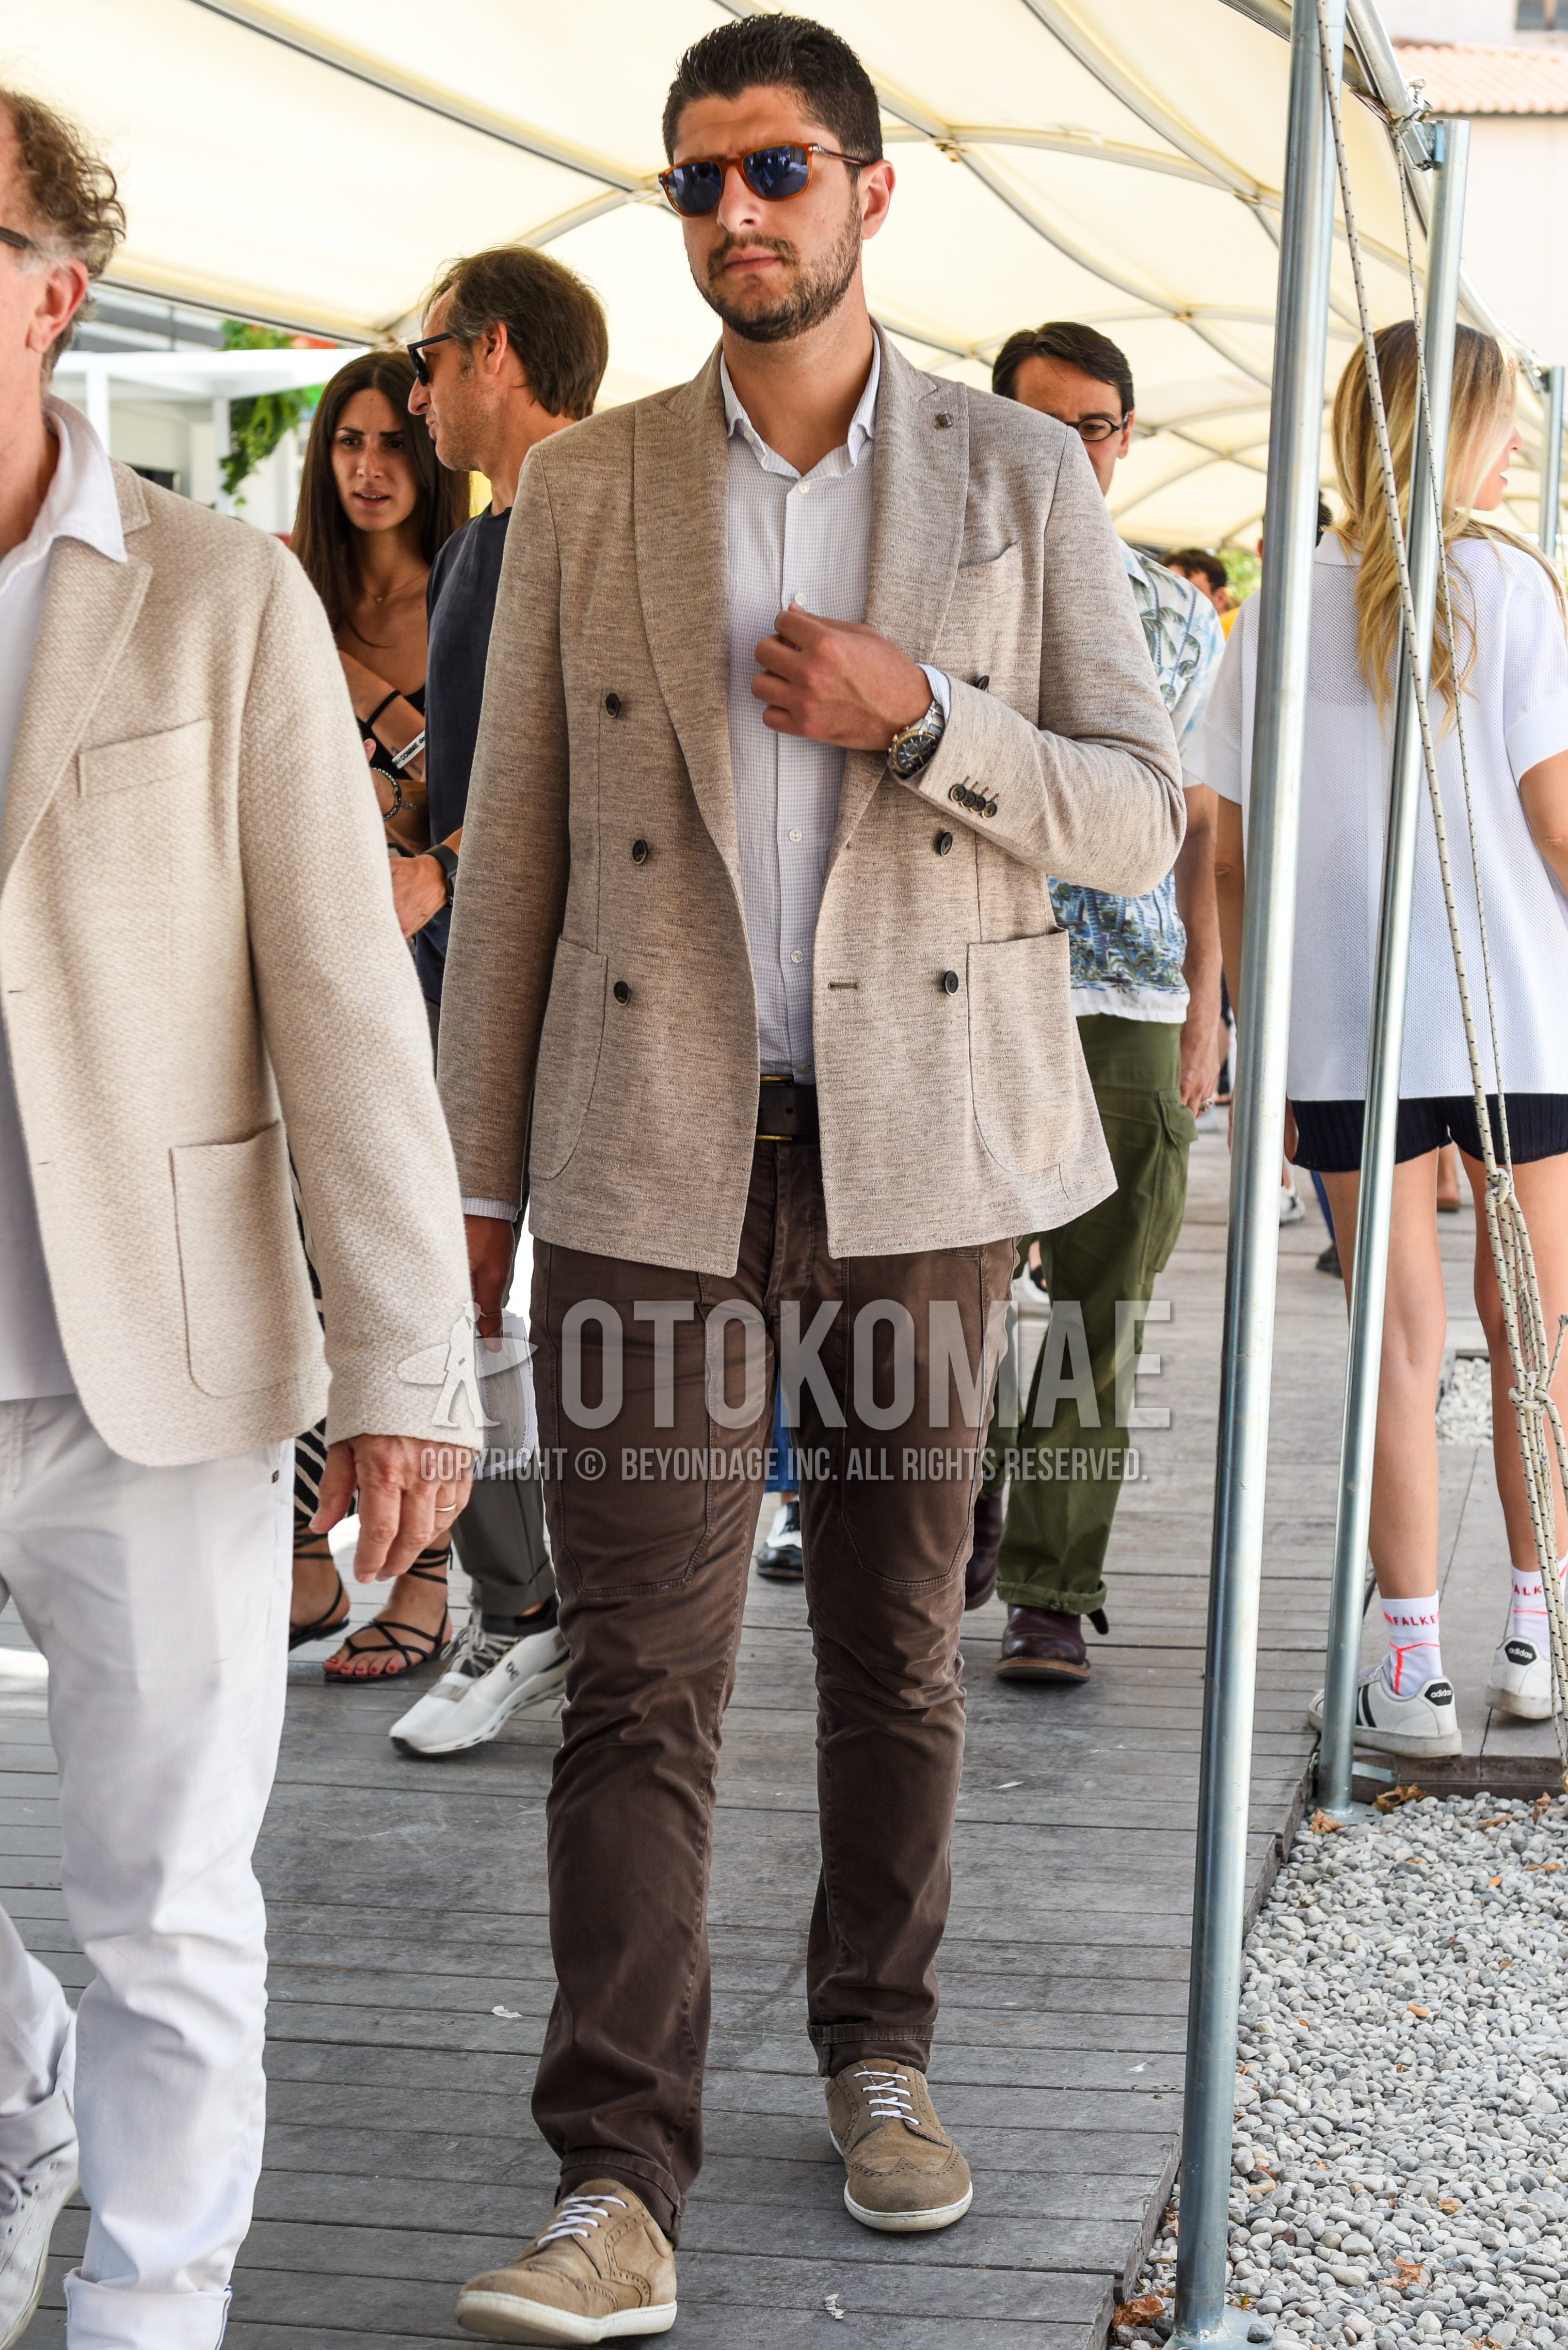 Men's spring summer outfit with brown tortoiseshell sunglasses, beige plain tailored jacket, white check shirt, brown plain leather belt, brown plain chinos, beige wing-tip shoes leather shoes.